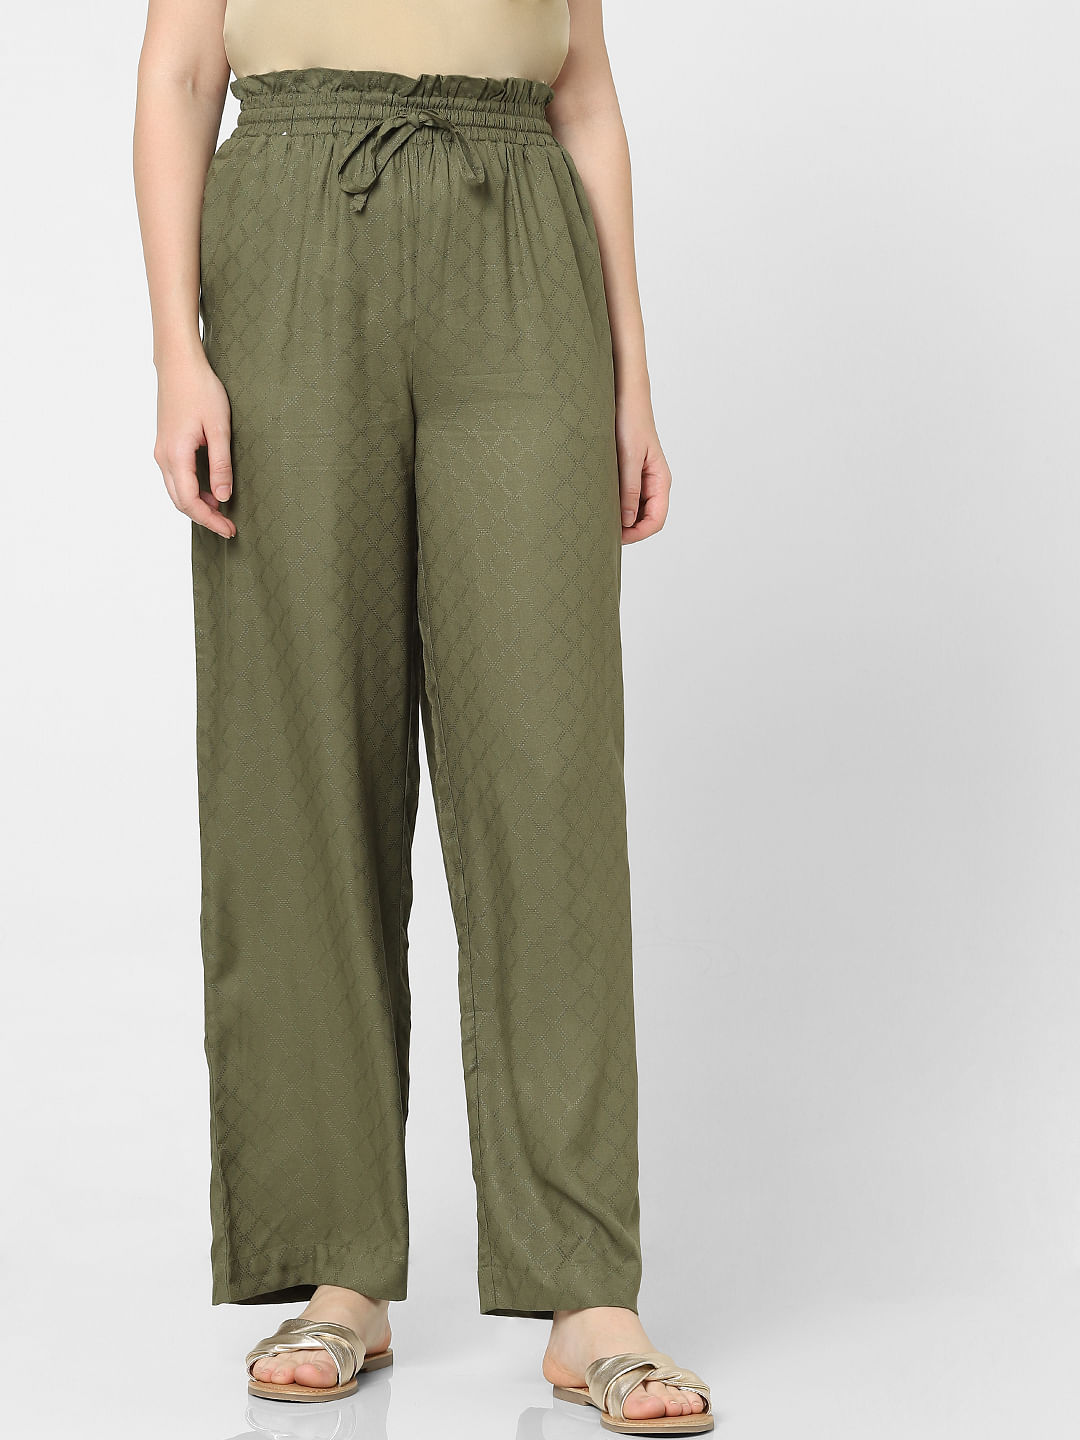 Buy Smith Print Tapered Fit Trousers Online at Best Prices in India   JioMart